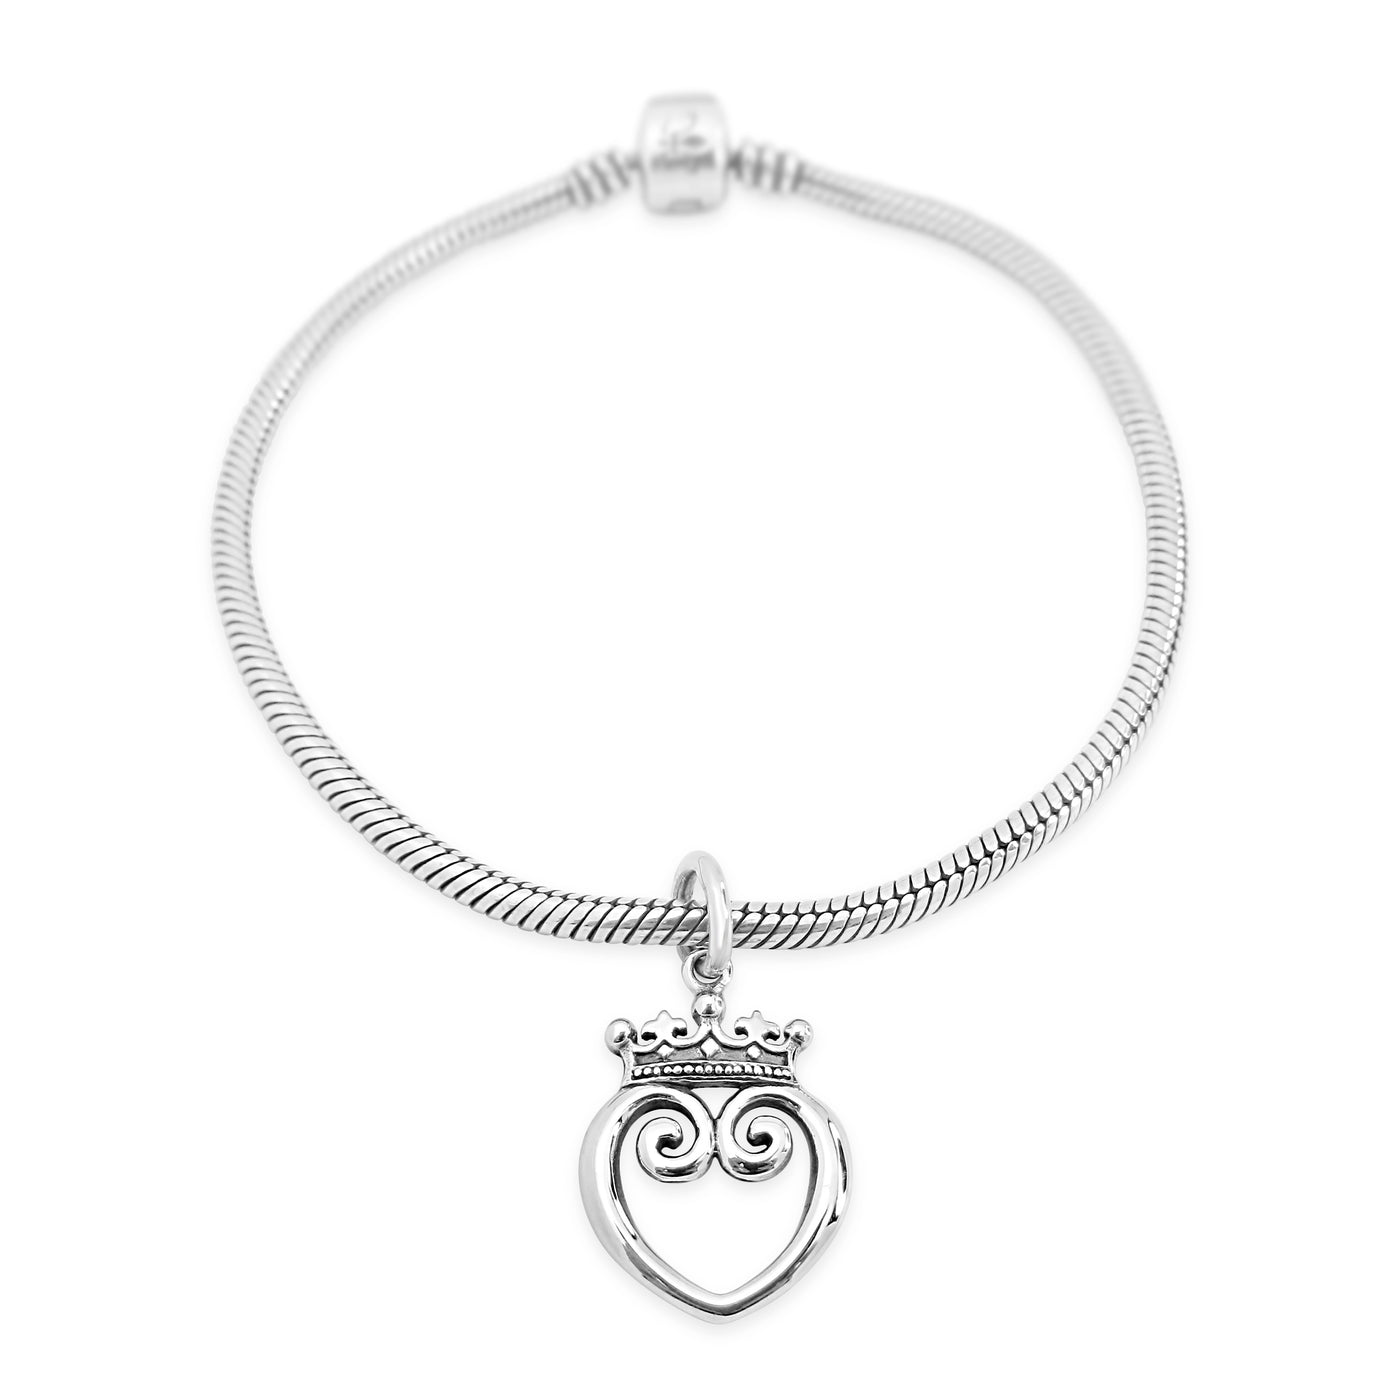 Queen of Hearts Couture Charm